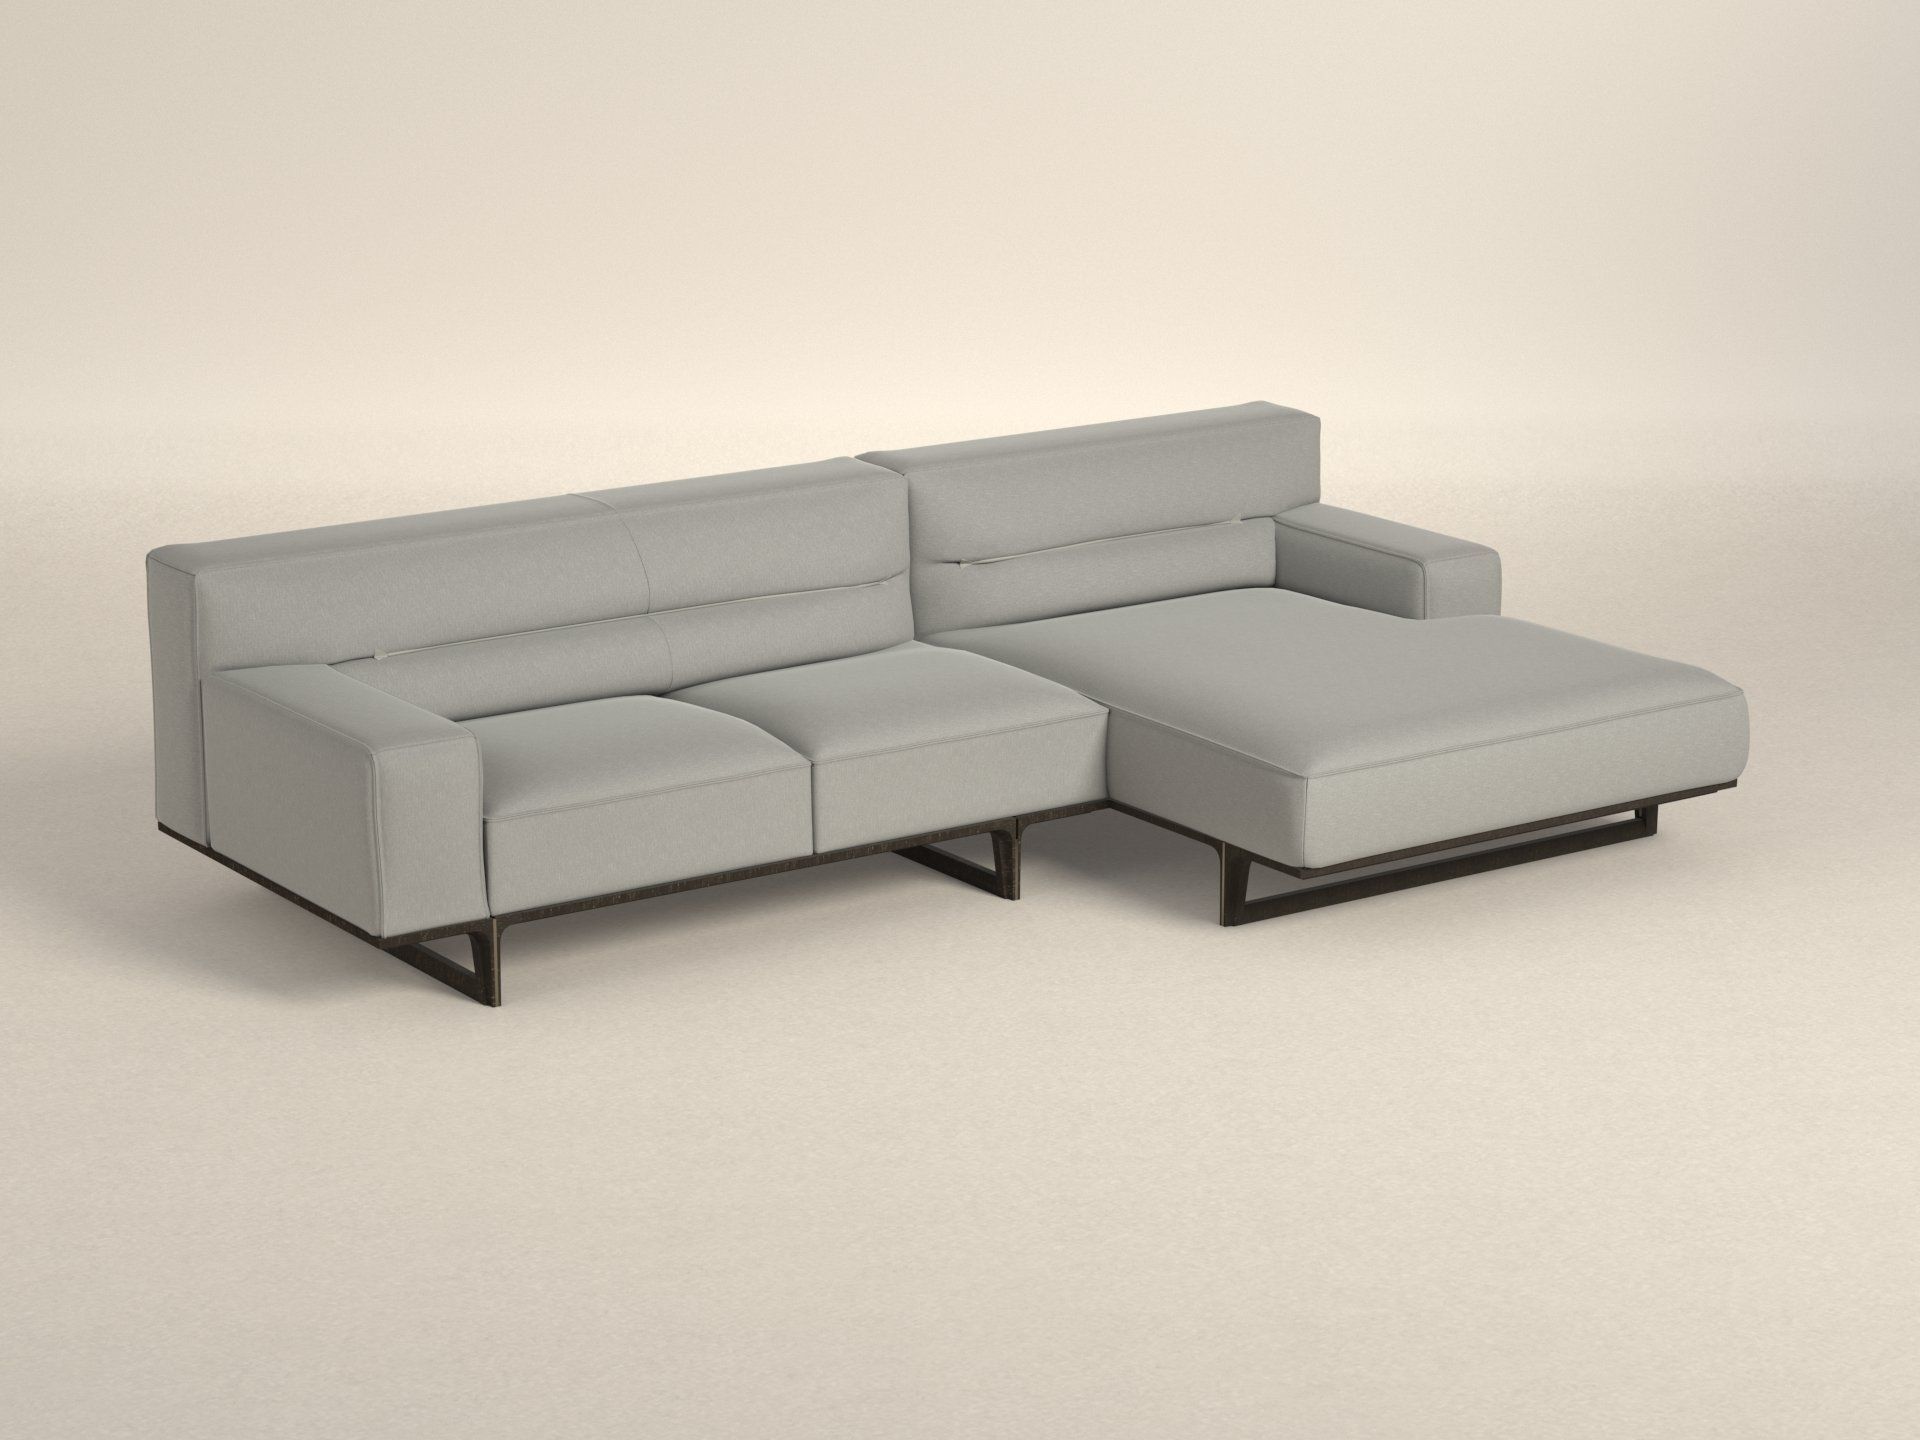 Preset default image - Kendo Sofa with Chaise on right side - Fabric